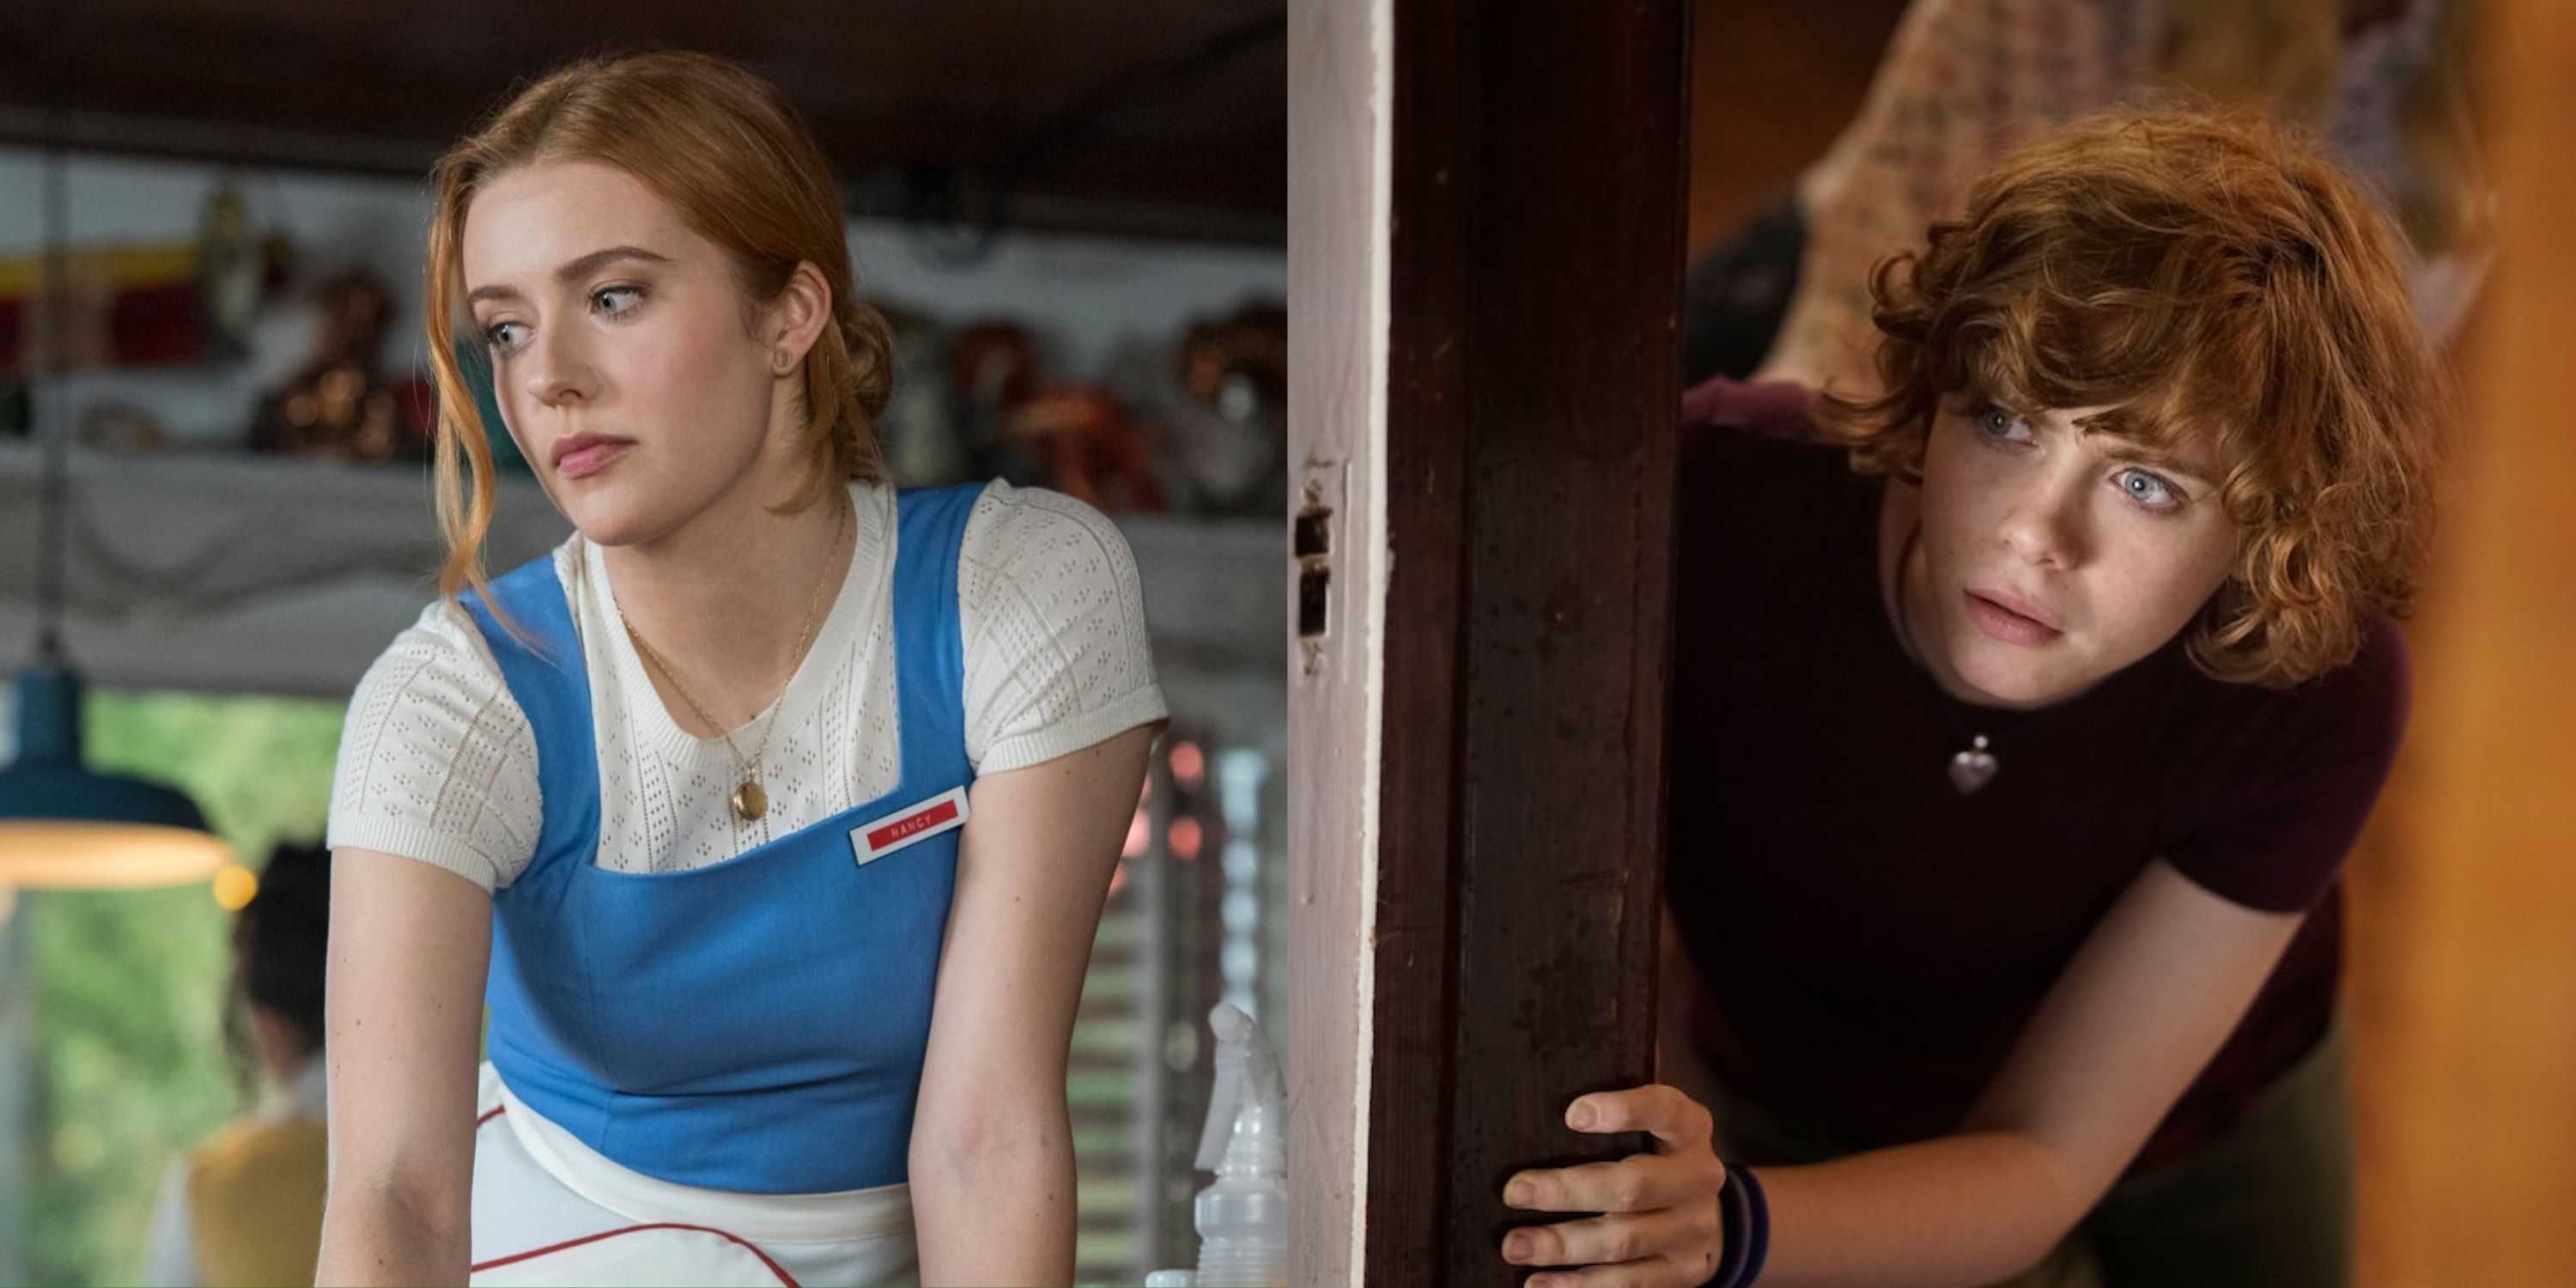 Split image of the Nancy Drew TV show and movie from 2019